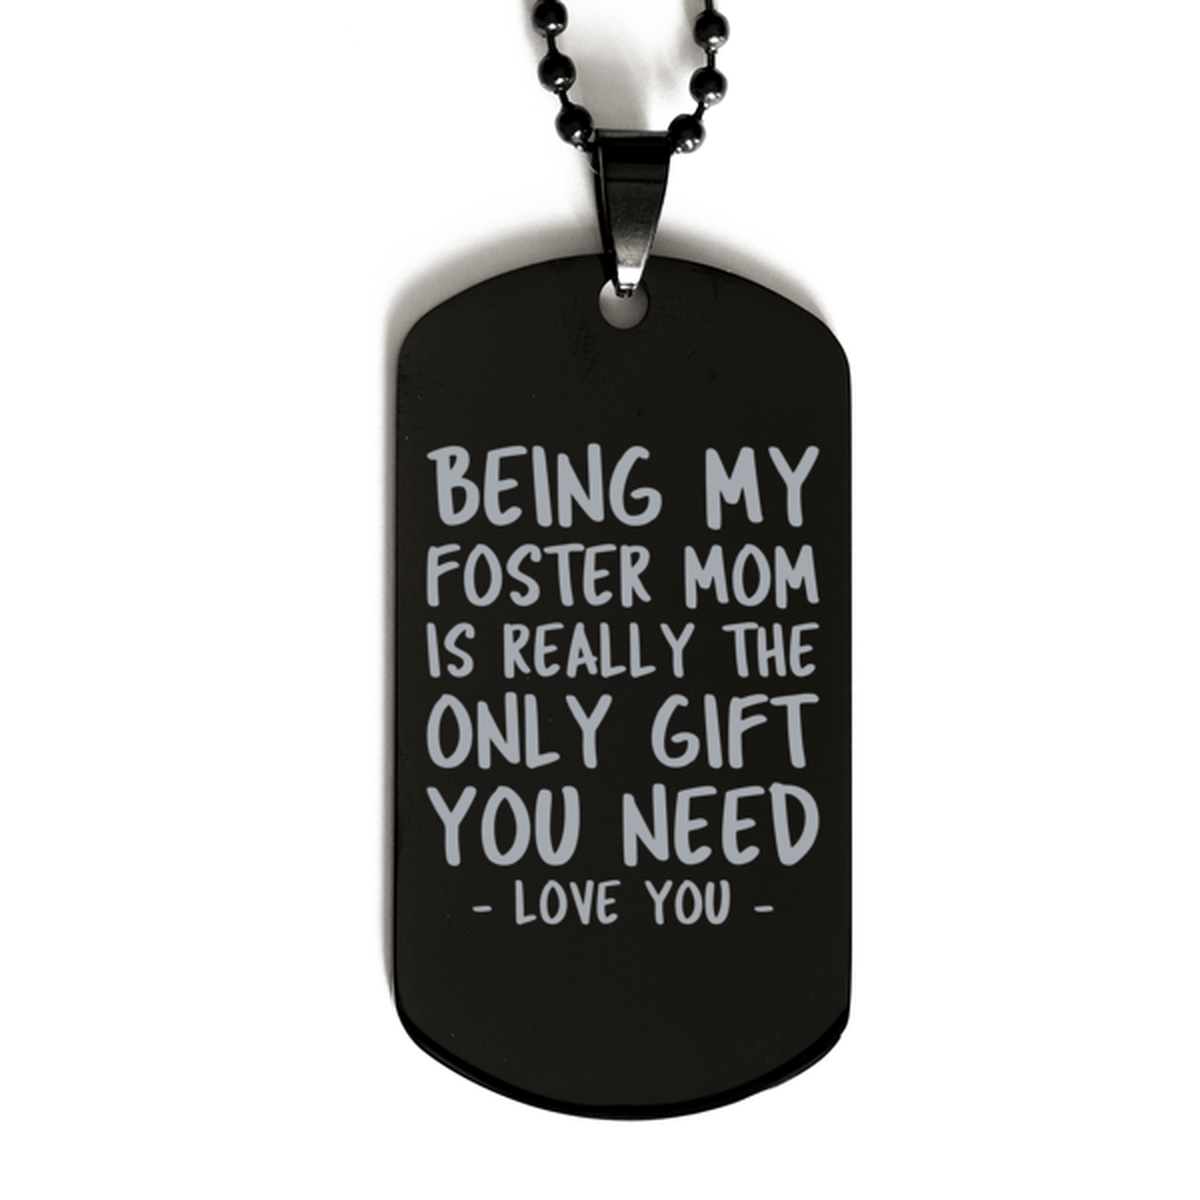 Funny Foster Mom Black Dog Tag Necklace, Being My Foster Mom Is Really the Only Gift You Need, Best Birthday Gifts for Foster Mom